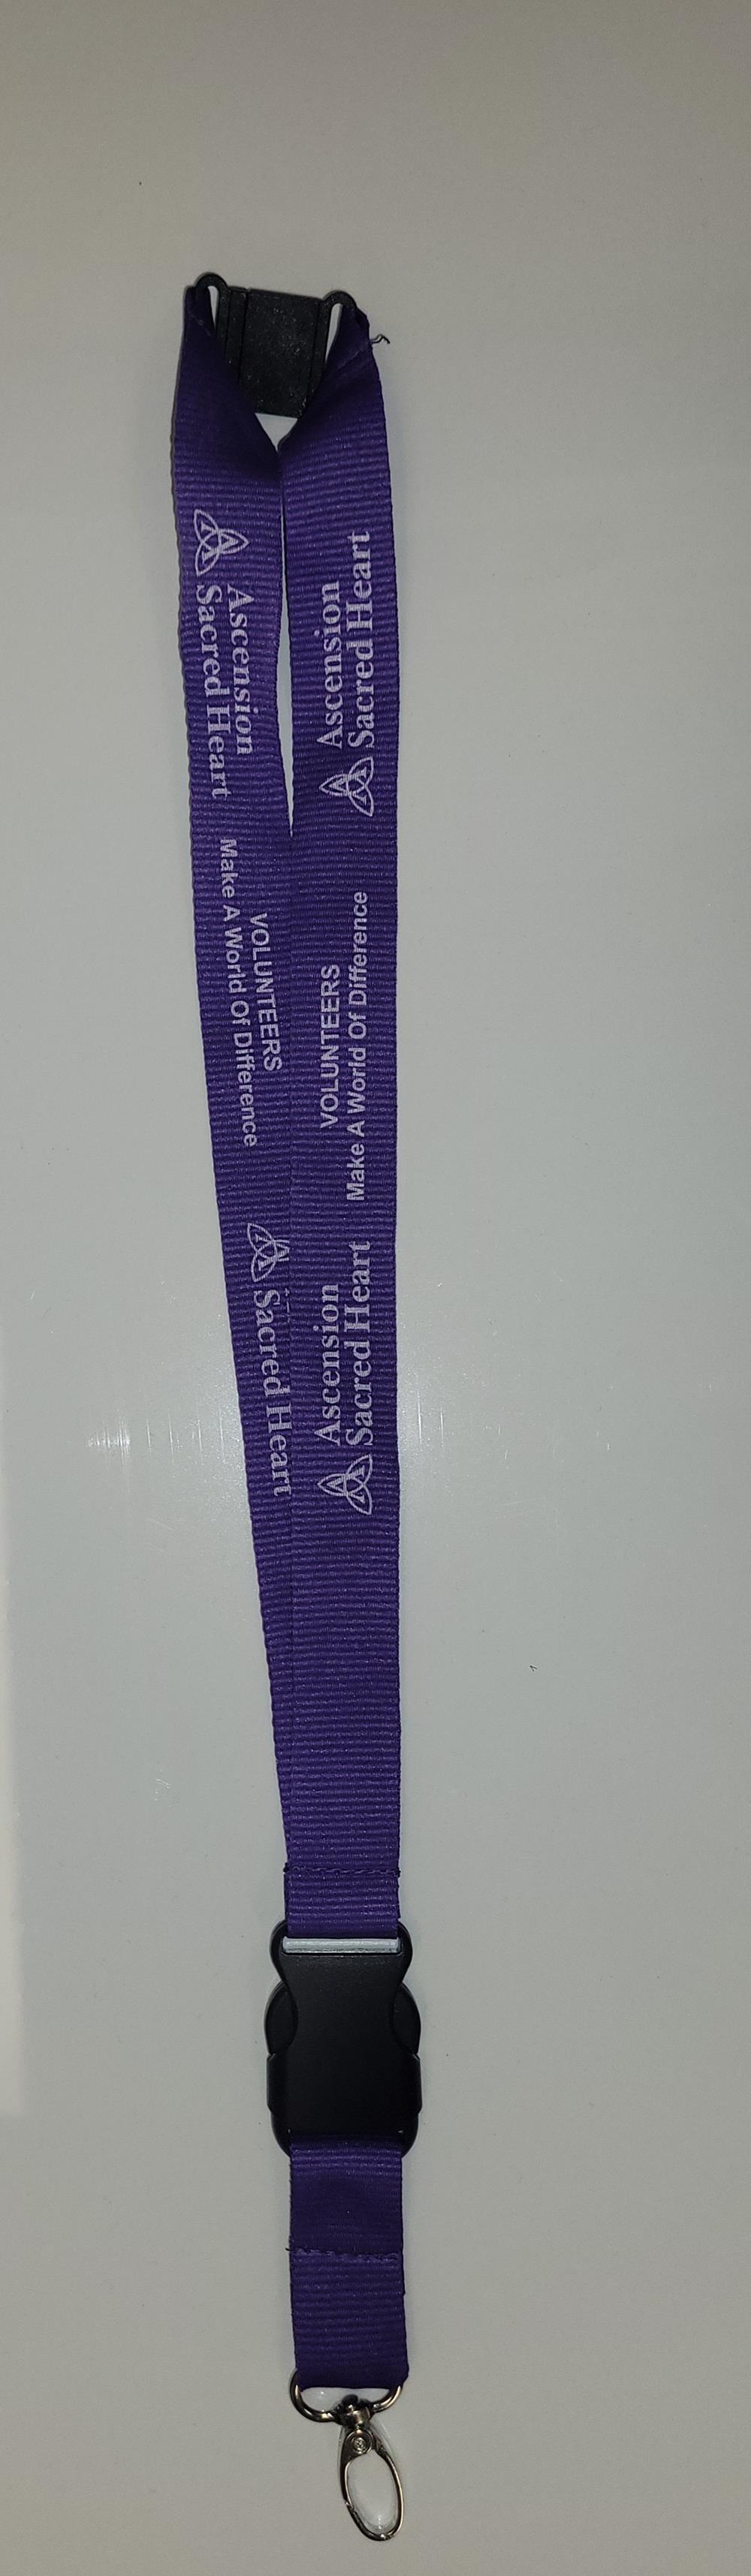 a purple lanyard with white text